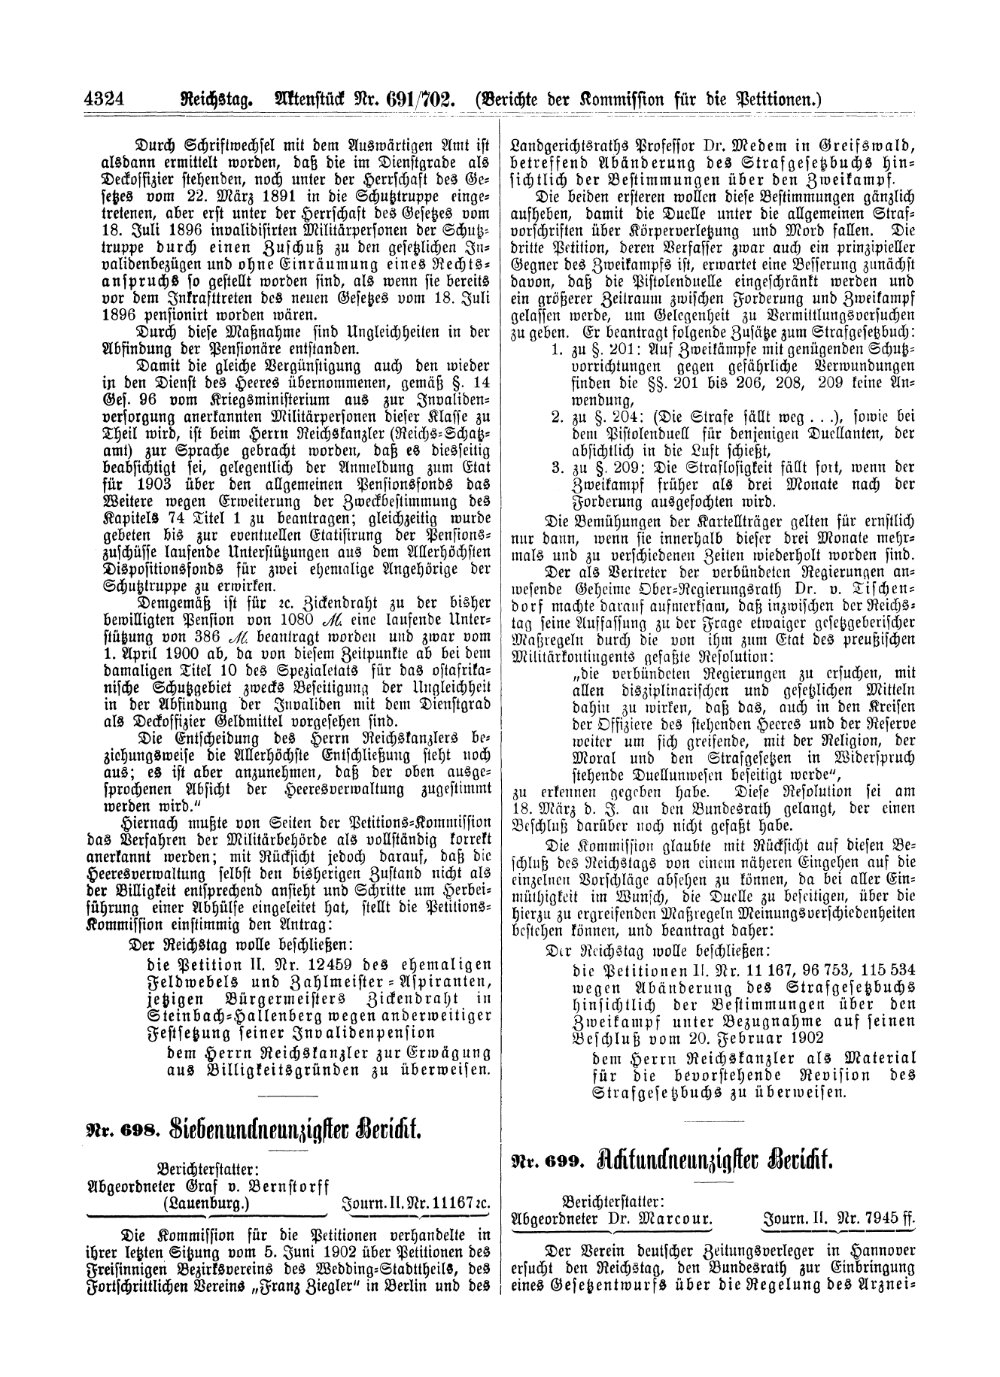 Scan of page 4324